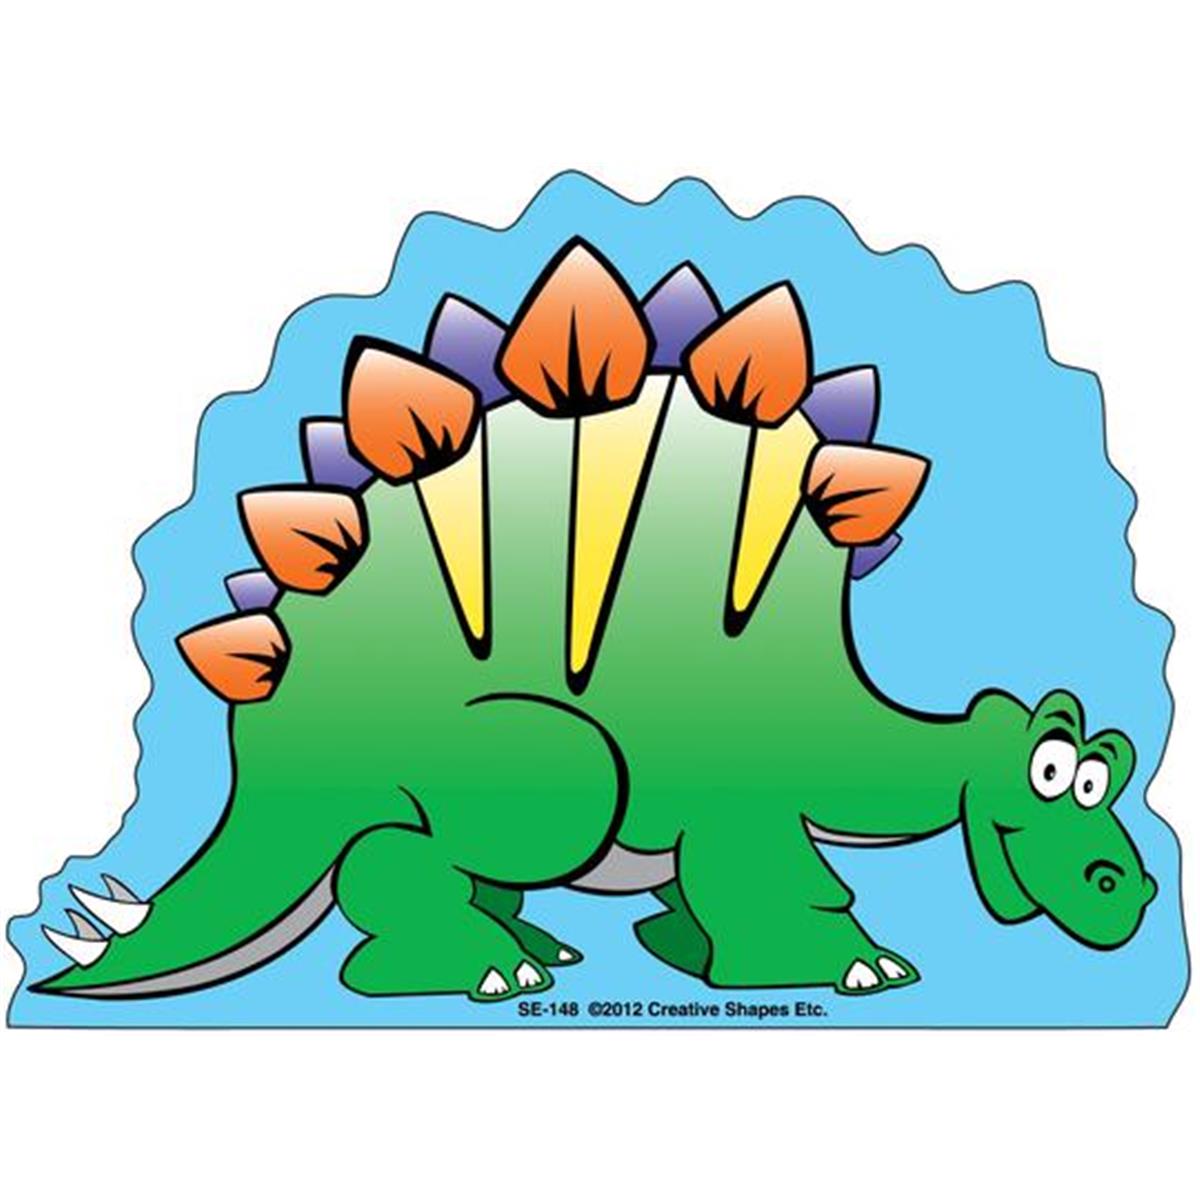 Se-148 9 X 6 In. Large Notepad, Stegosaurus - 50 Sheets Per Pack